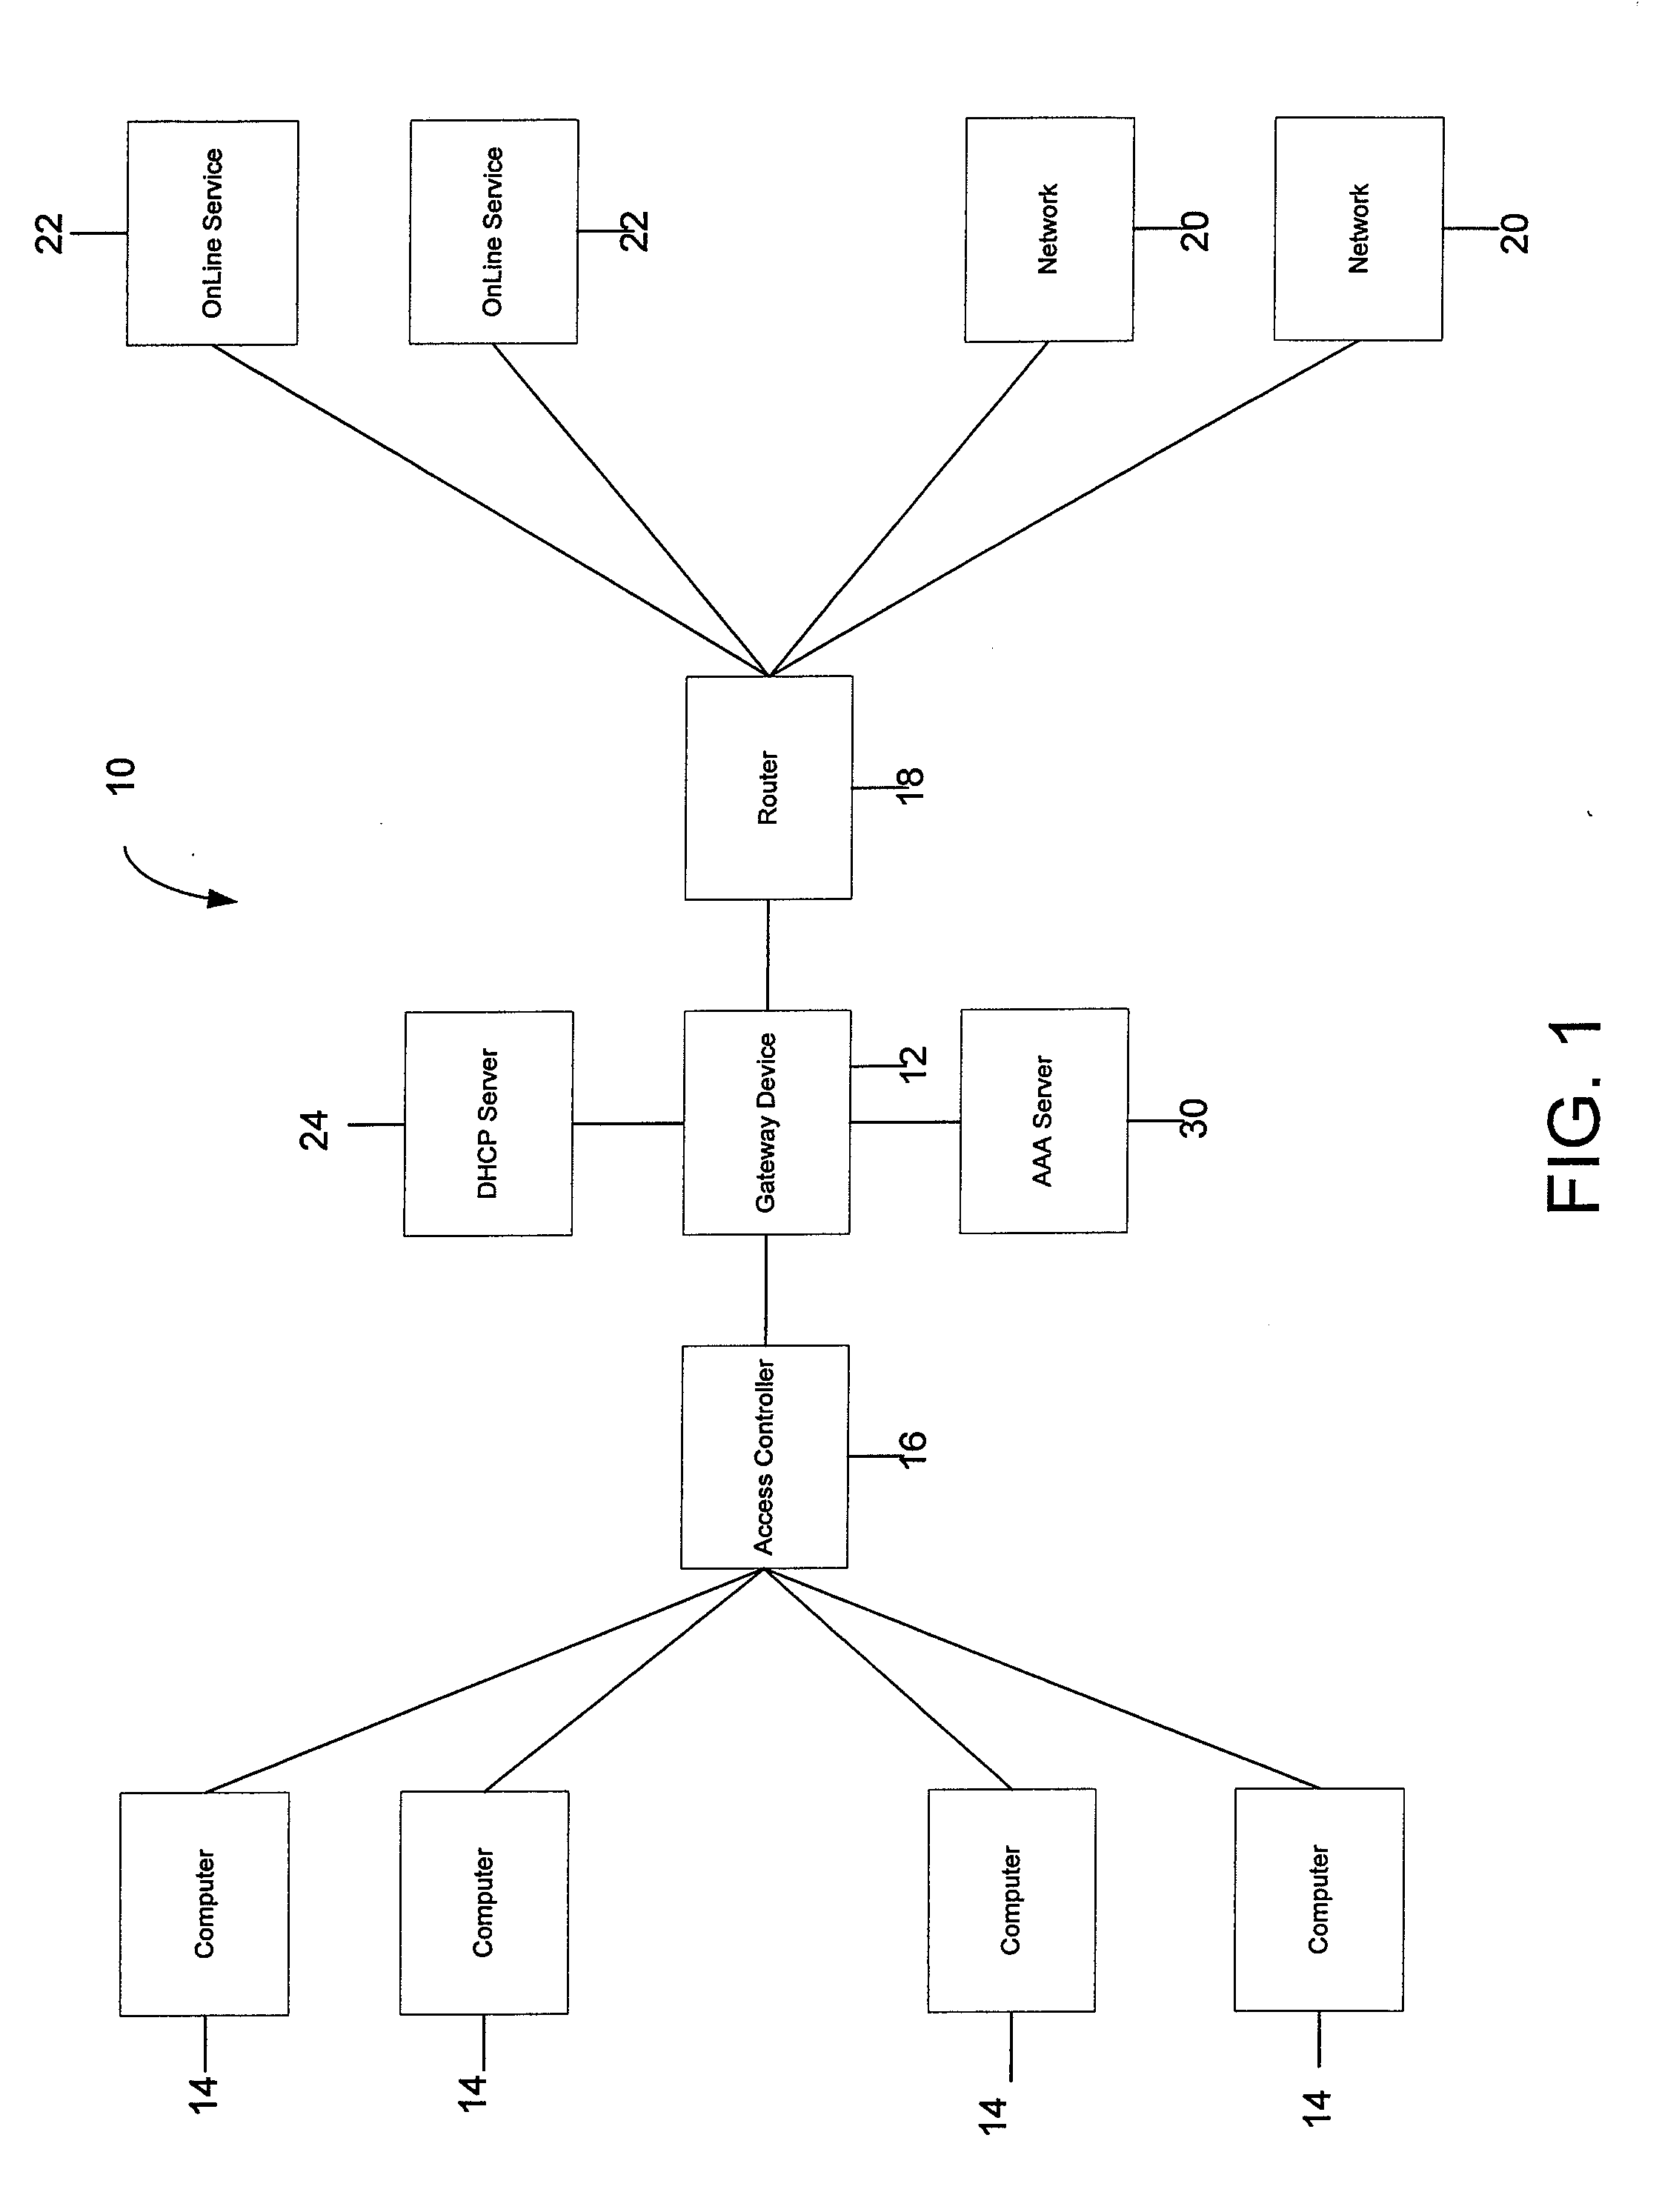 Systems and Methods for Providing Dynamic Network Authorization, Authentication and Accounting